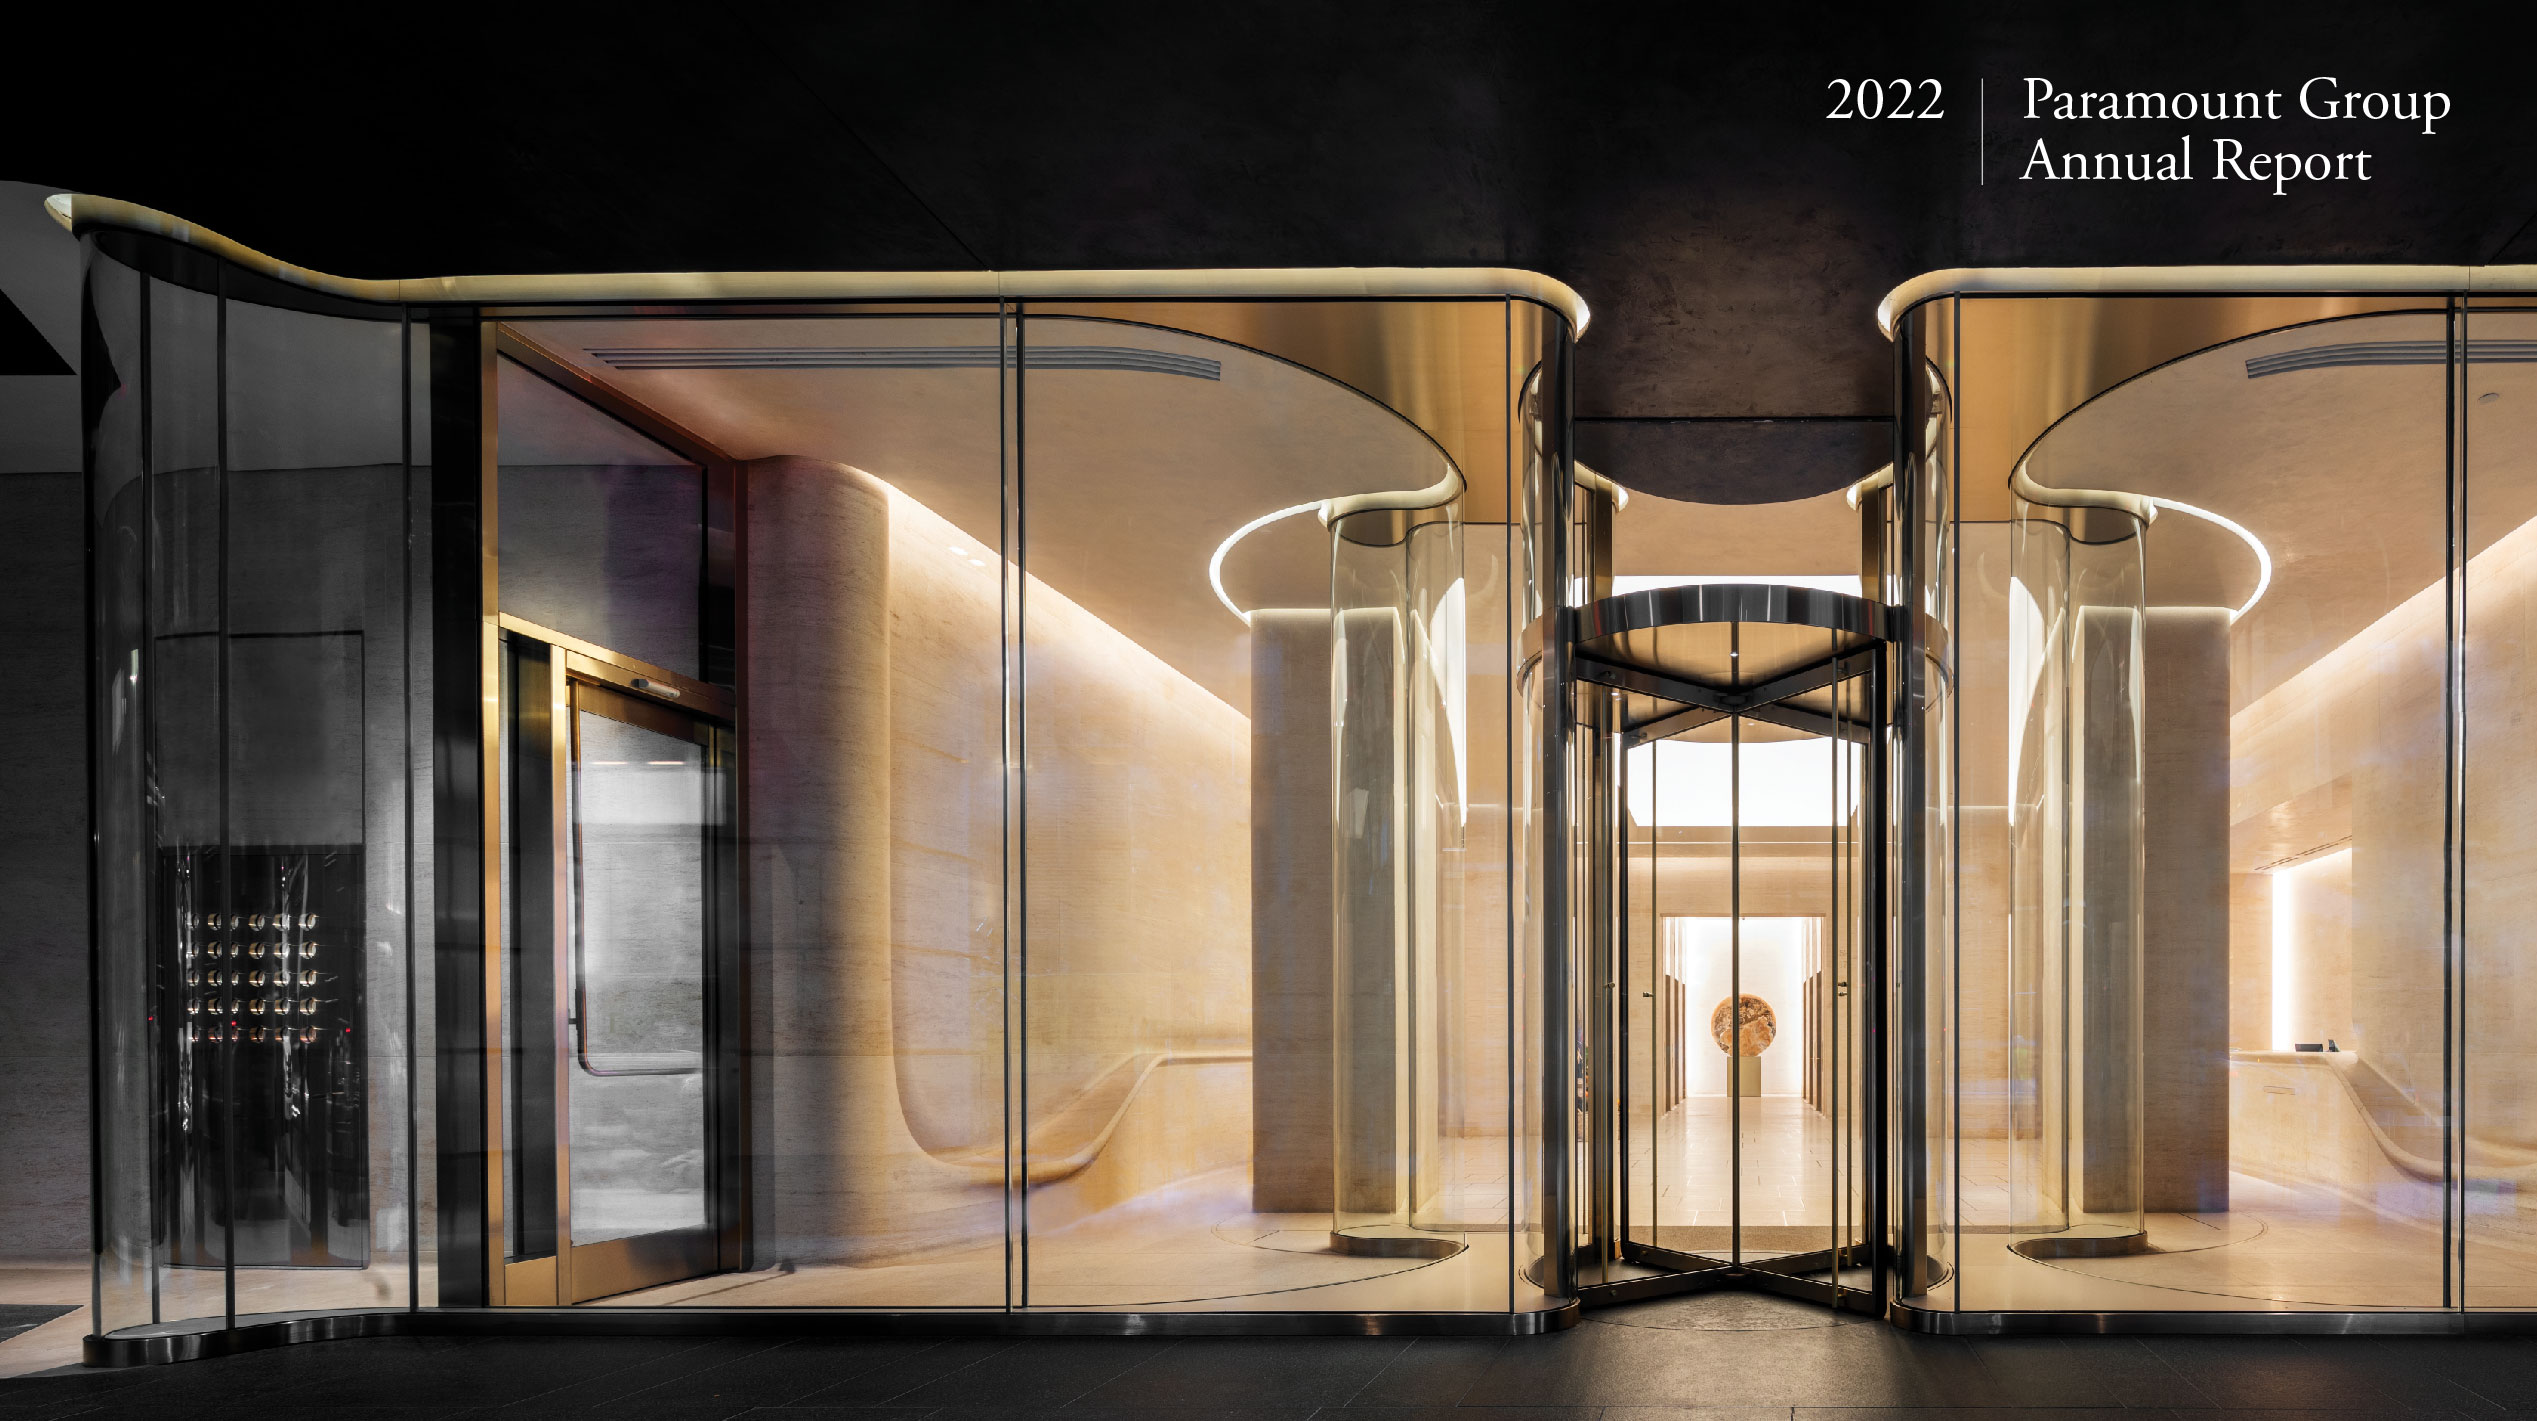 paramount image of lobby entrance with glass windows